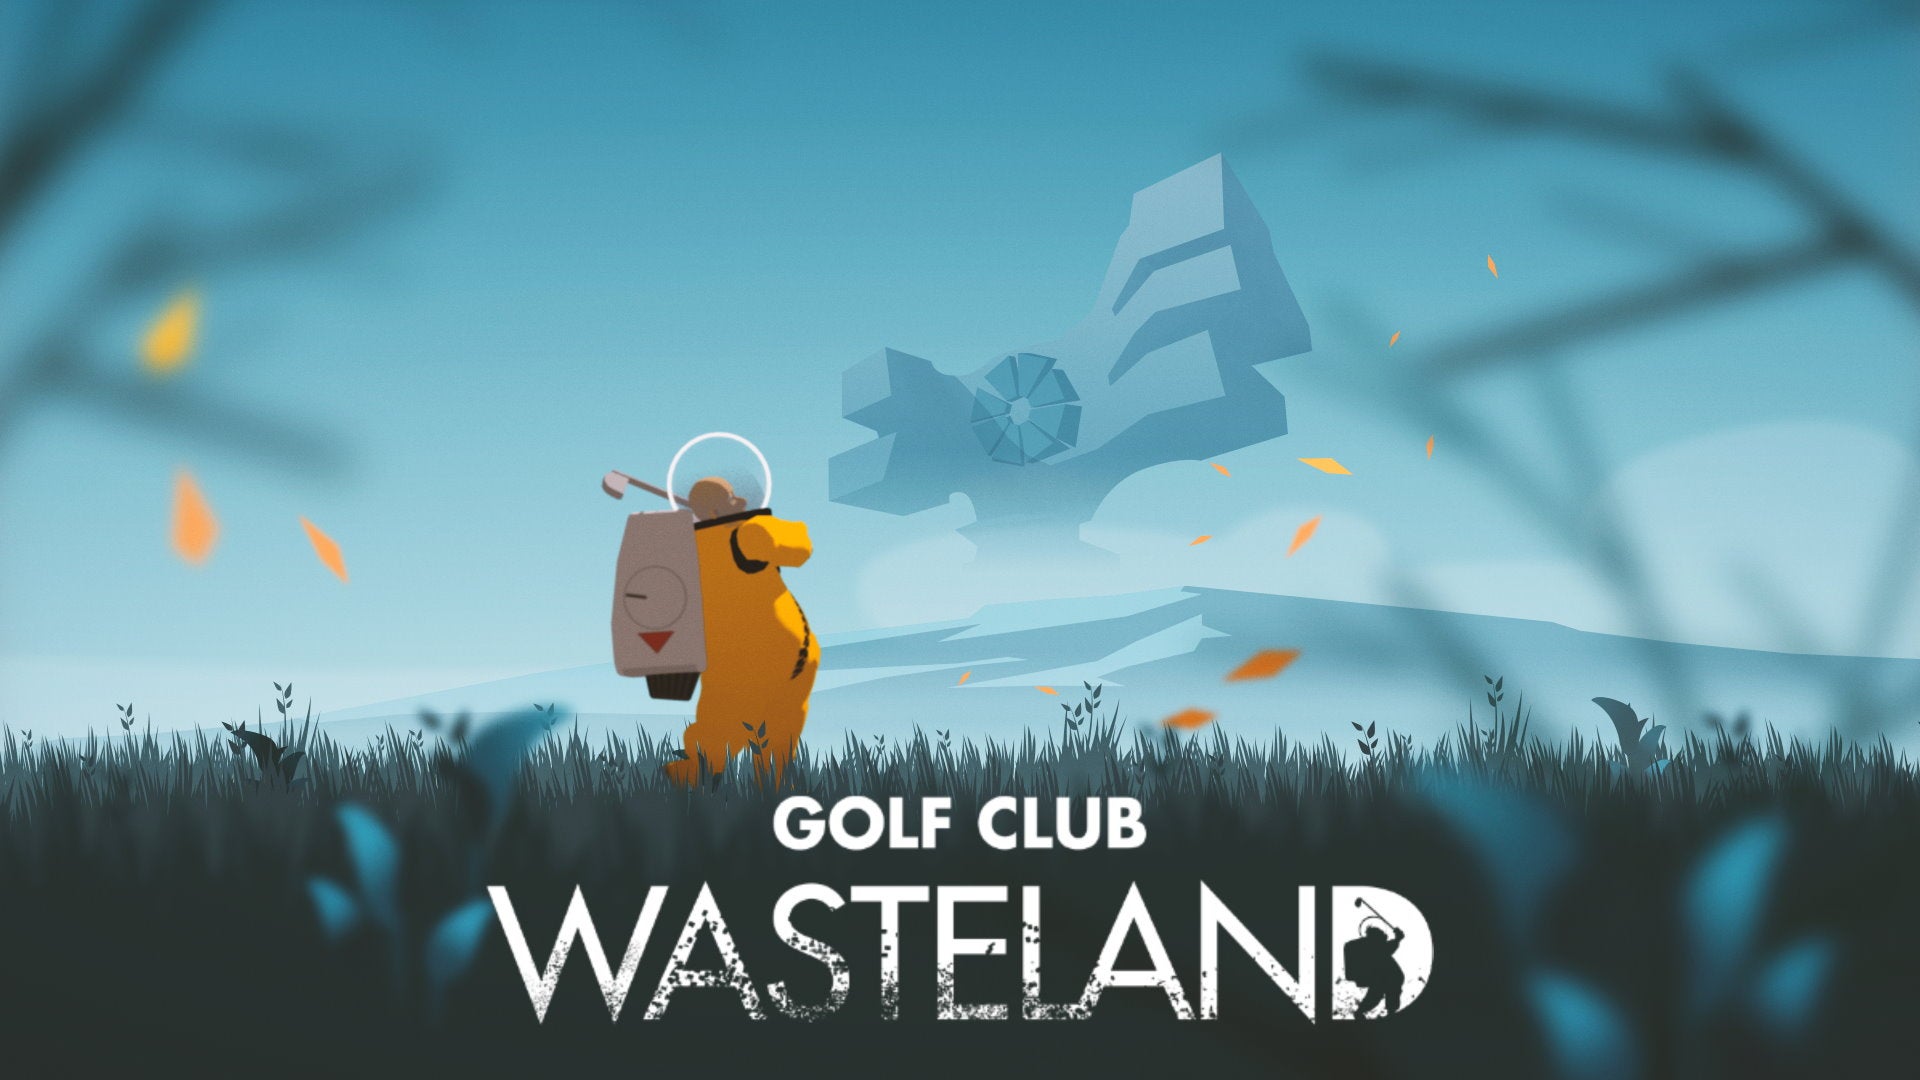 Artwork for Golf Club Wasteland, showing a golfer in a space suit teeing off on a grassy planet surface